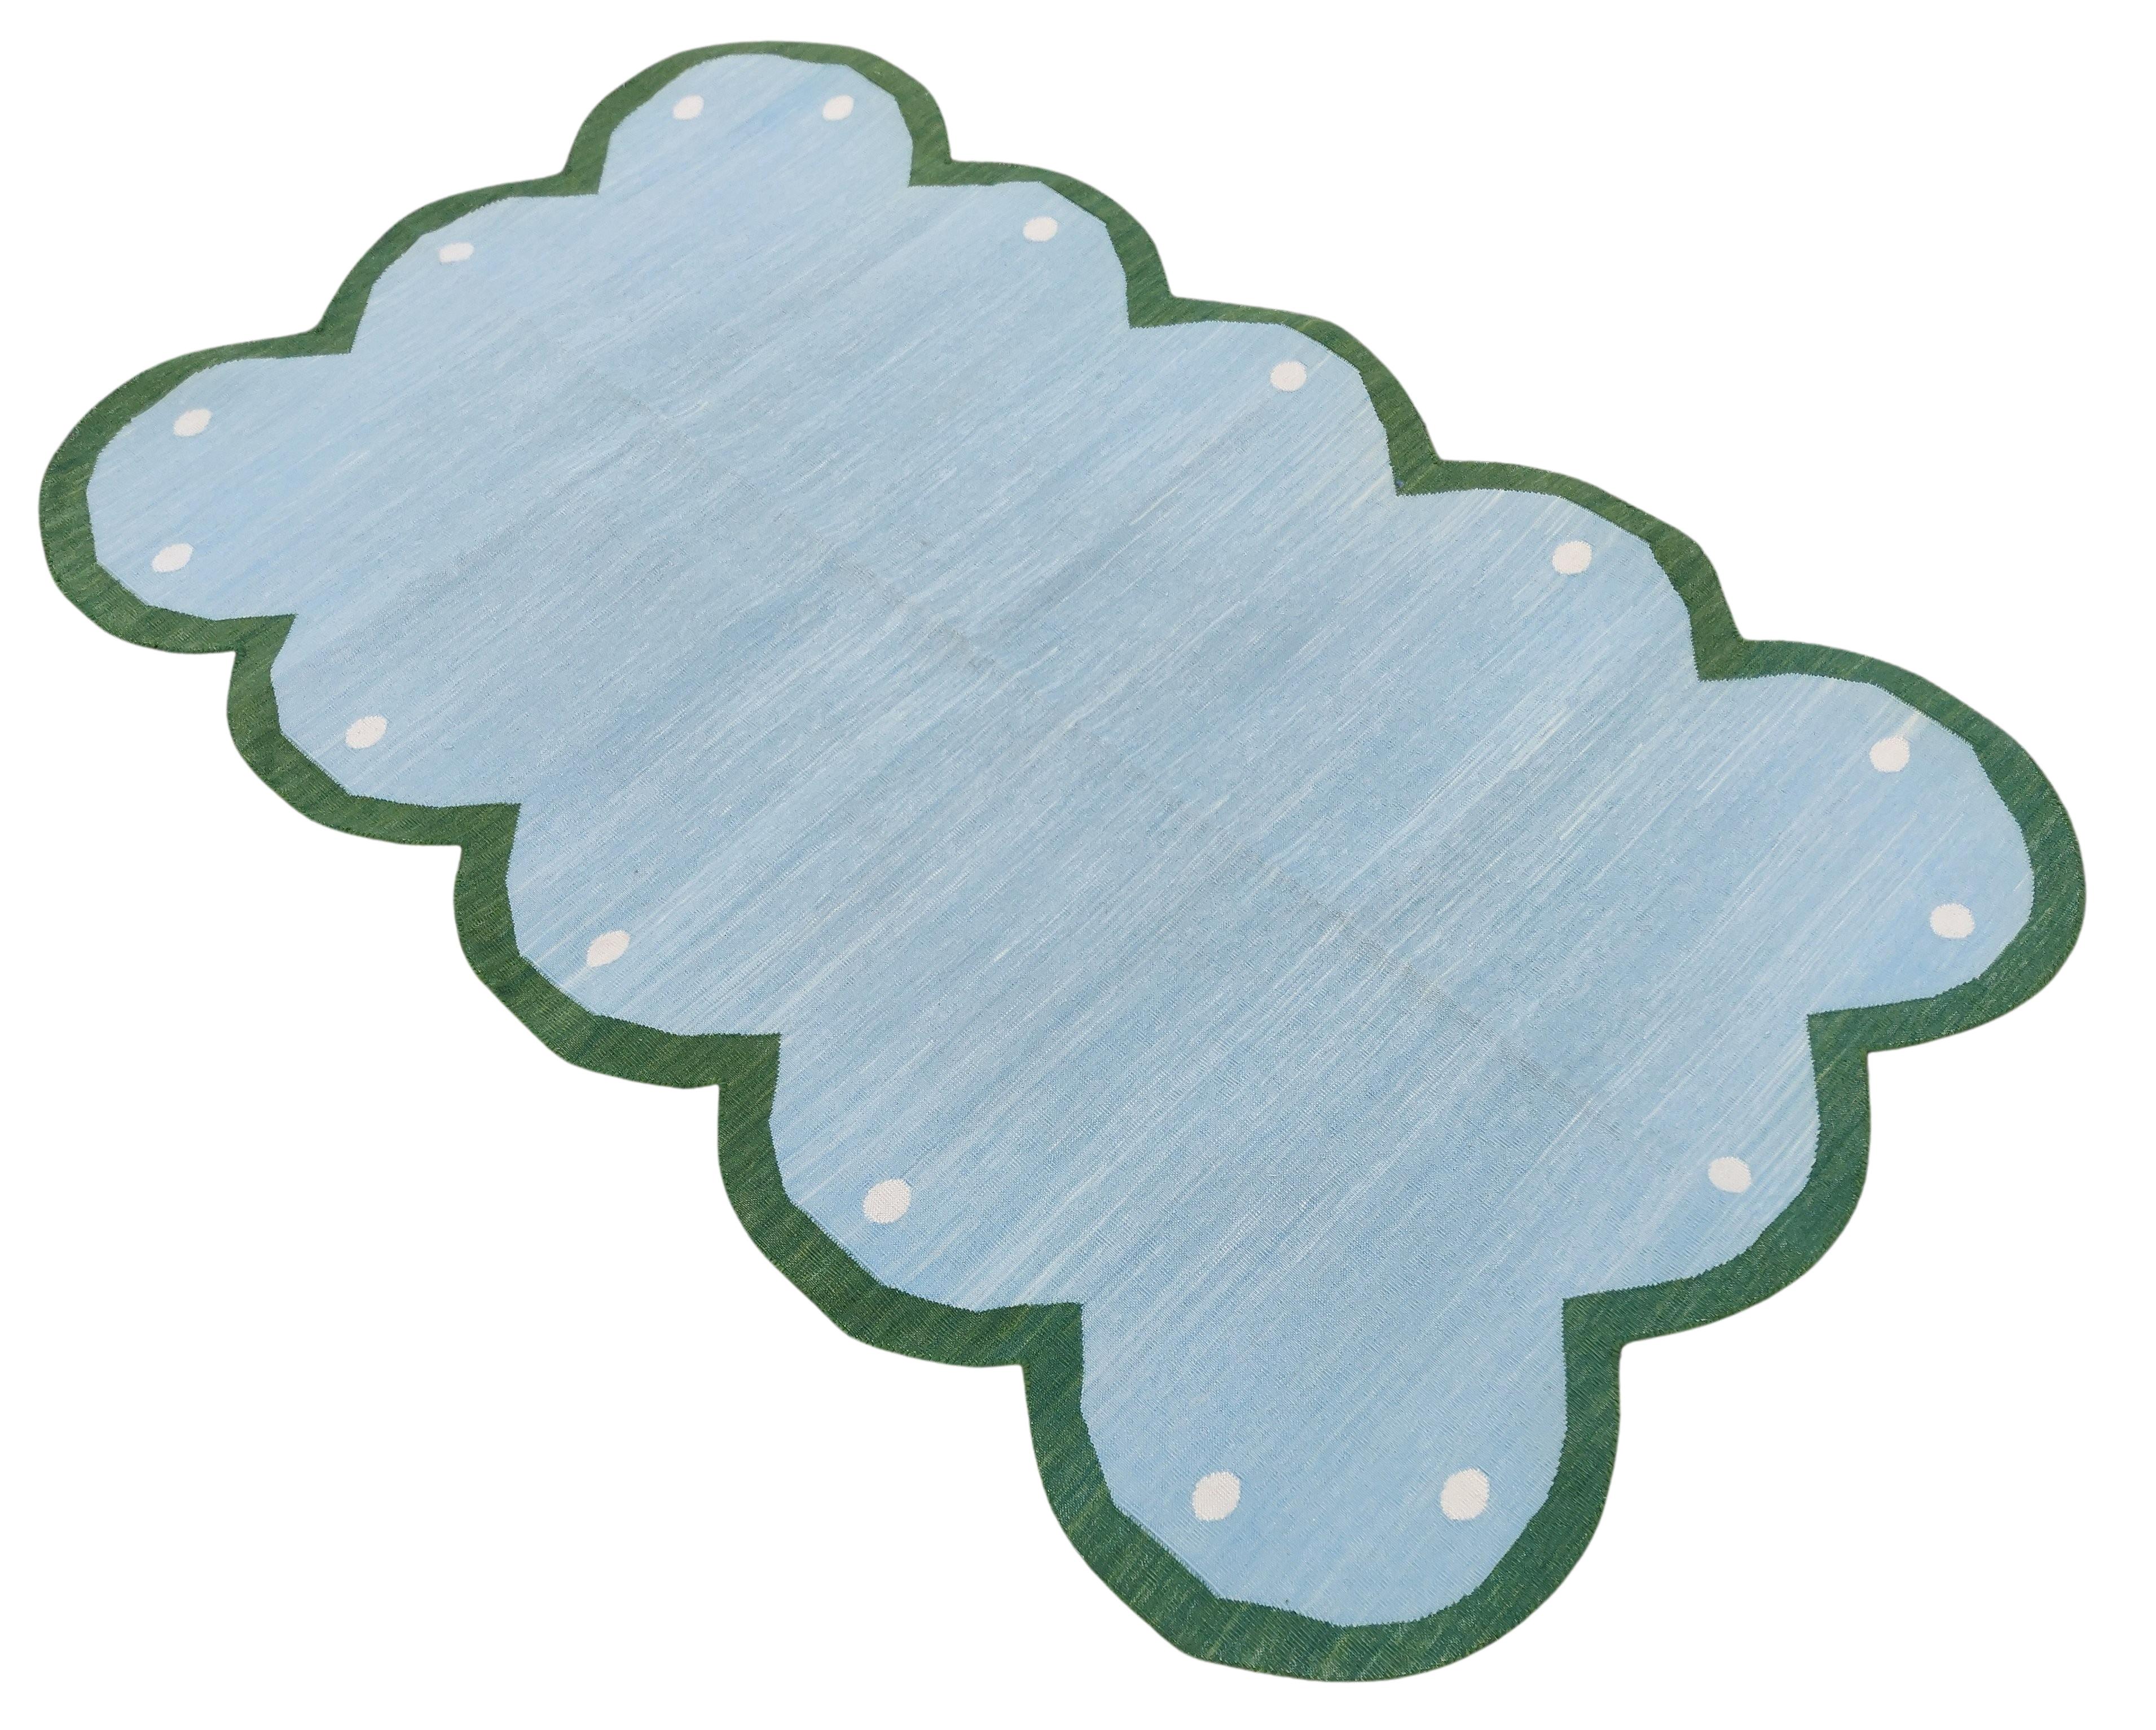 Cotton Vegetable Dyed Sky Blue & Forest Green Four Sided Scalloped Rug-10'x14' 
(Scallops runs on all 4 Sides)
These special flat-weave dhurries are hand-woven with 15 ply 100% cotton yarn. Due to the special manufacturing techniques used to create